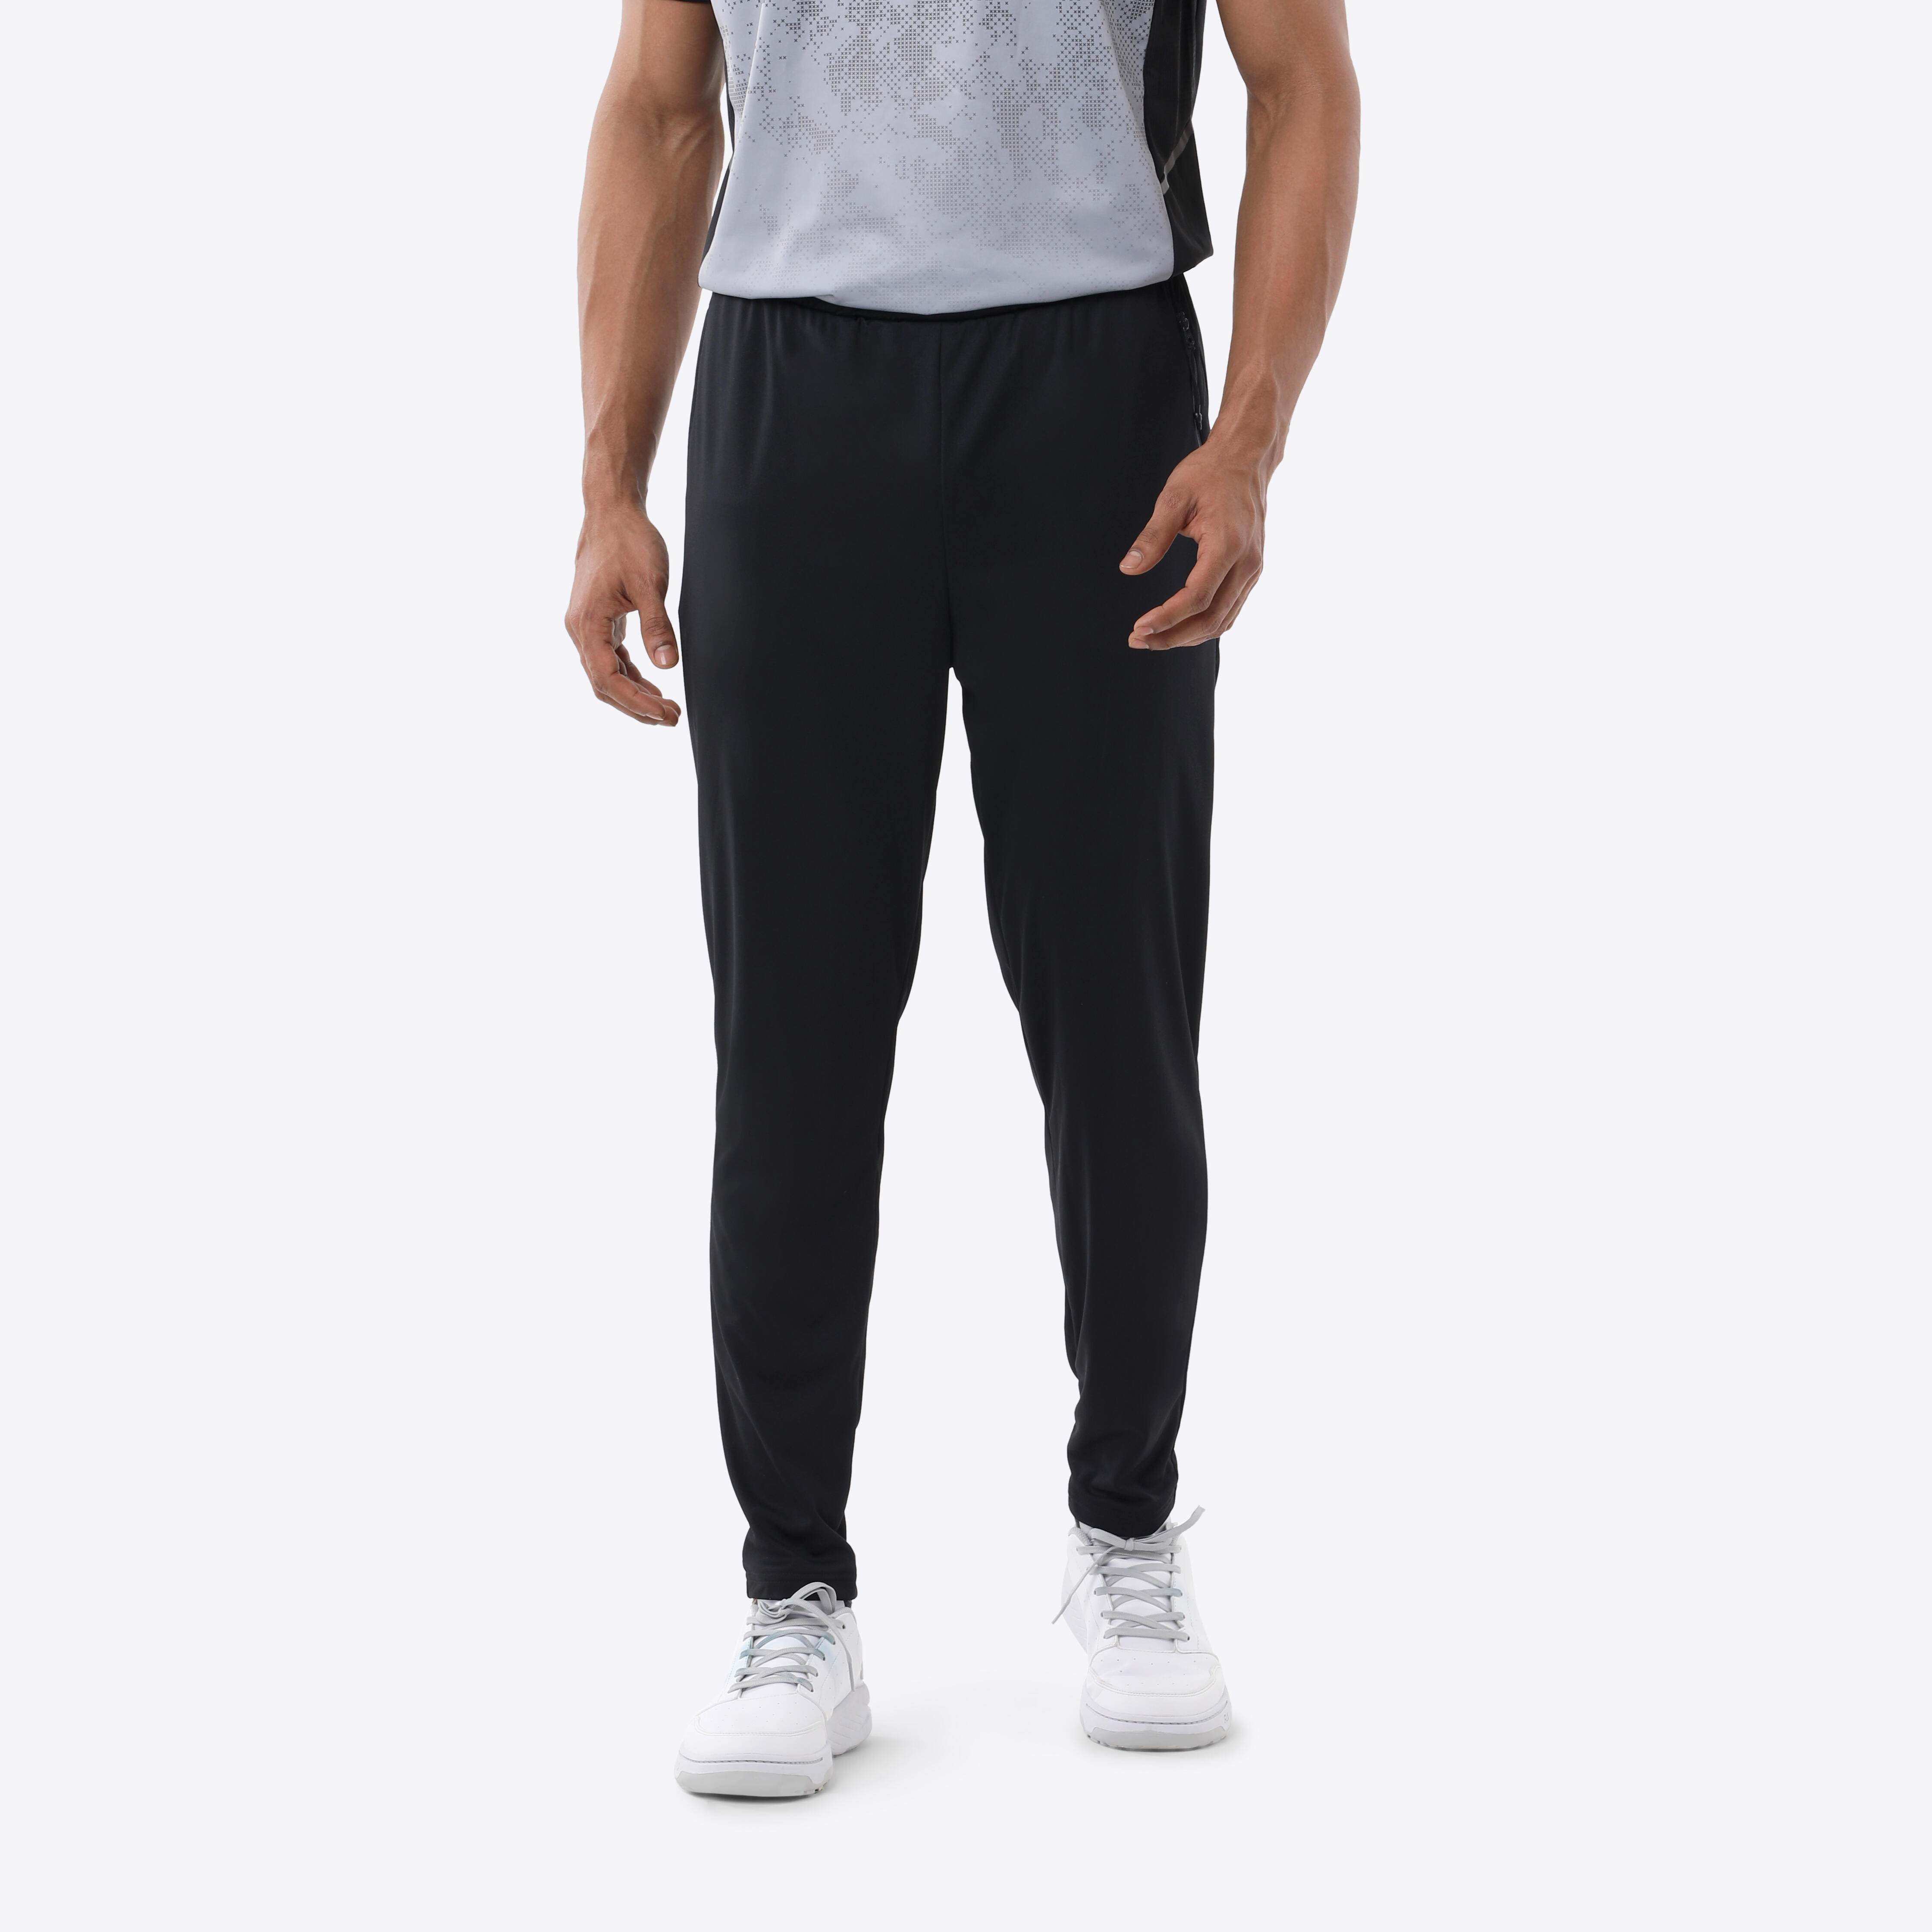 Flx Track Pants, Slim Fit, TPR 500, Adults, Cricket & All Sports - Black  (S) : Amazon.in: Clothing & Accessories